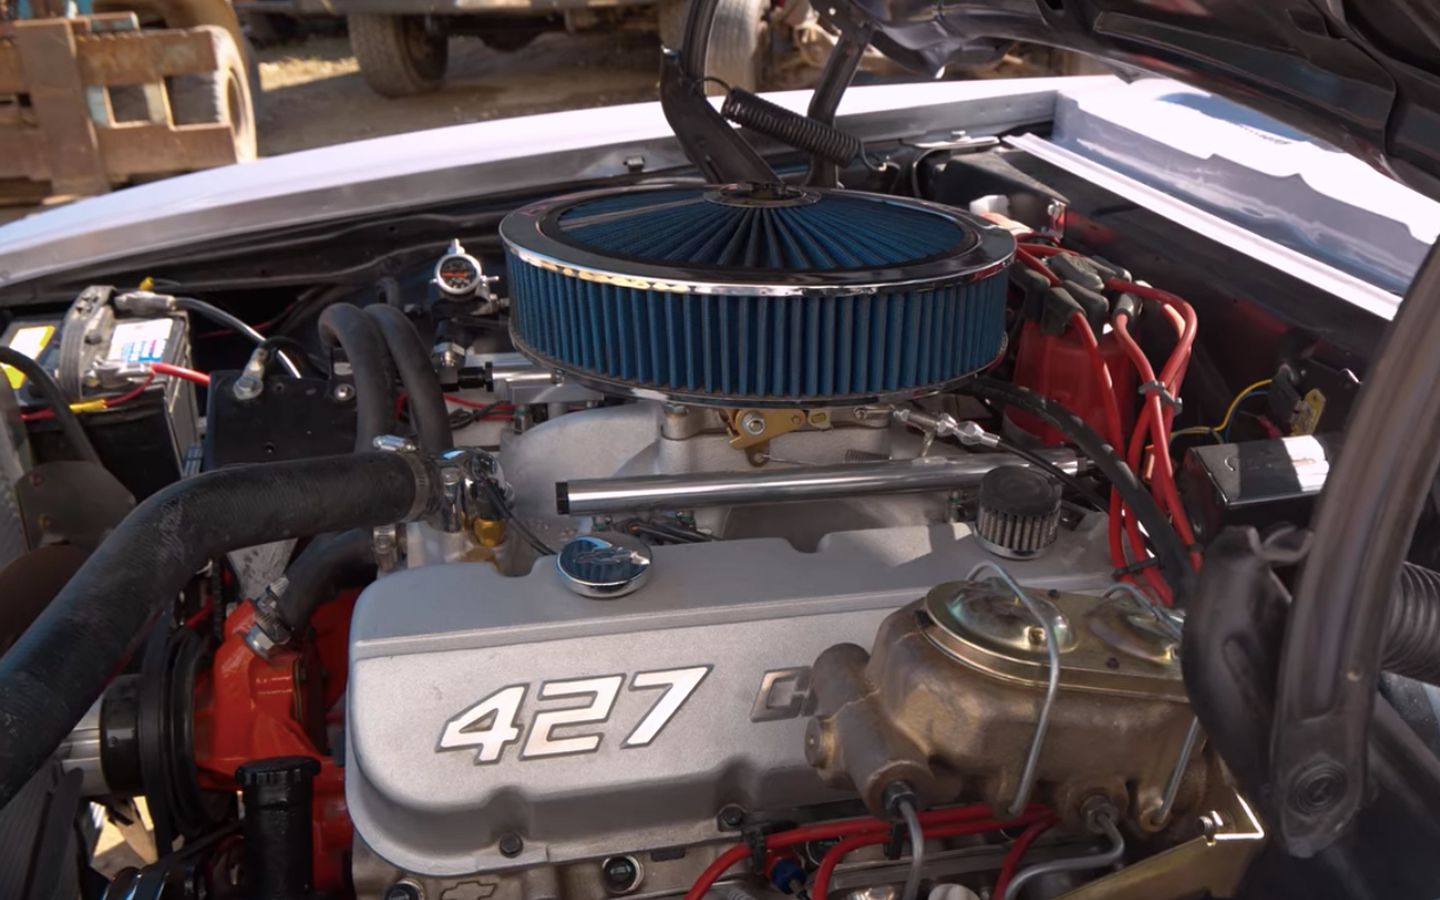 The 1968 Chevy Camaro had a special 427 engine offering